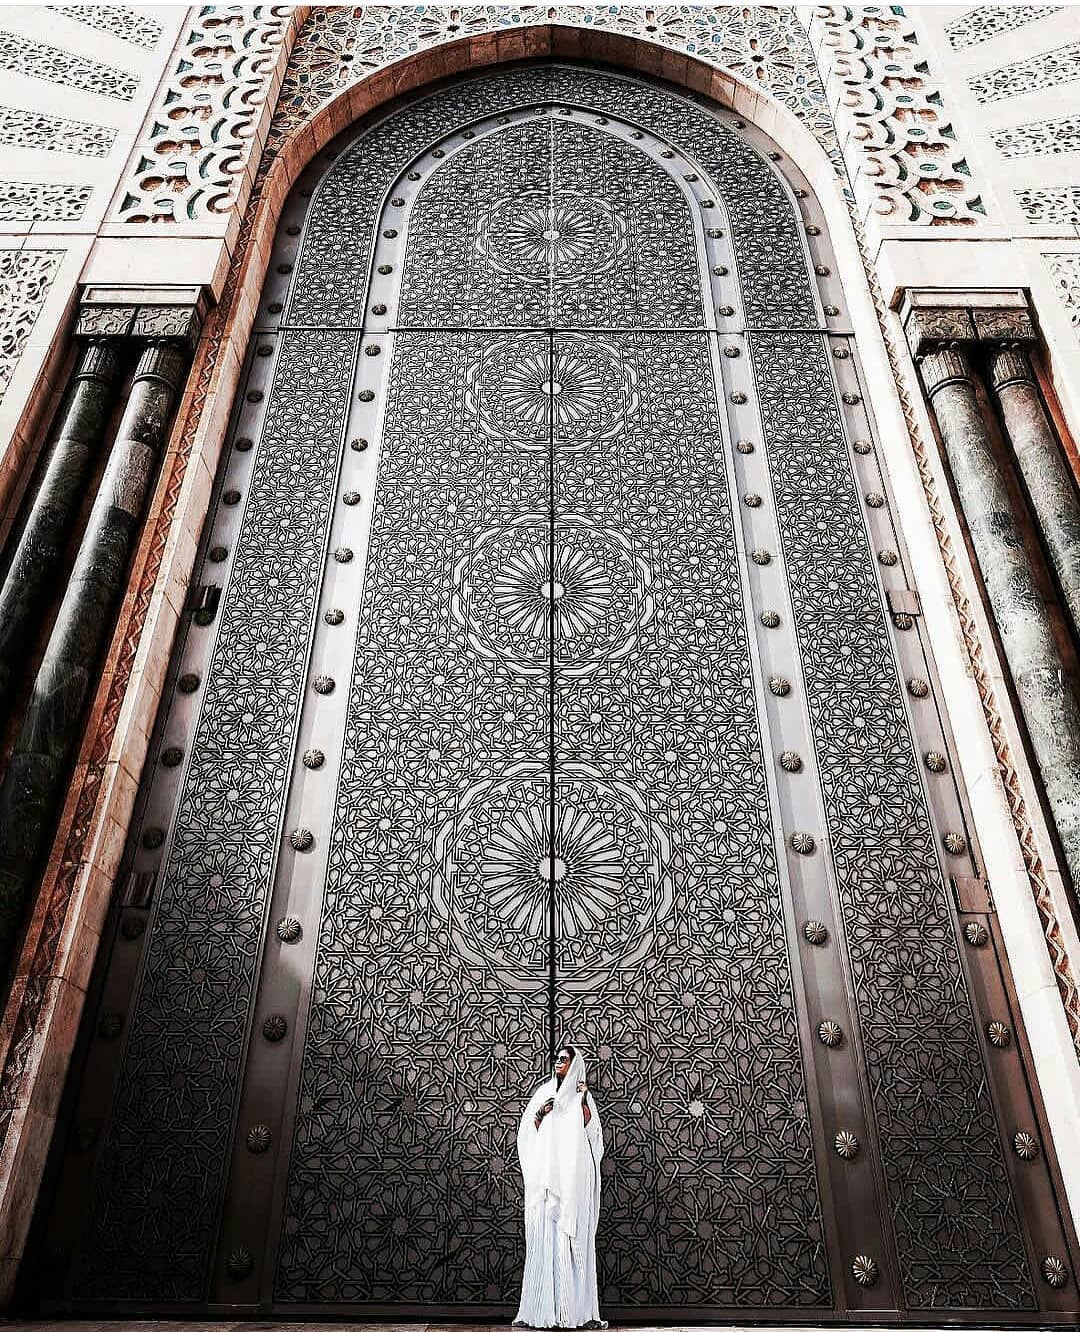 We all know this is Hassan II mosque in  Morocco but how high is this door thoug…